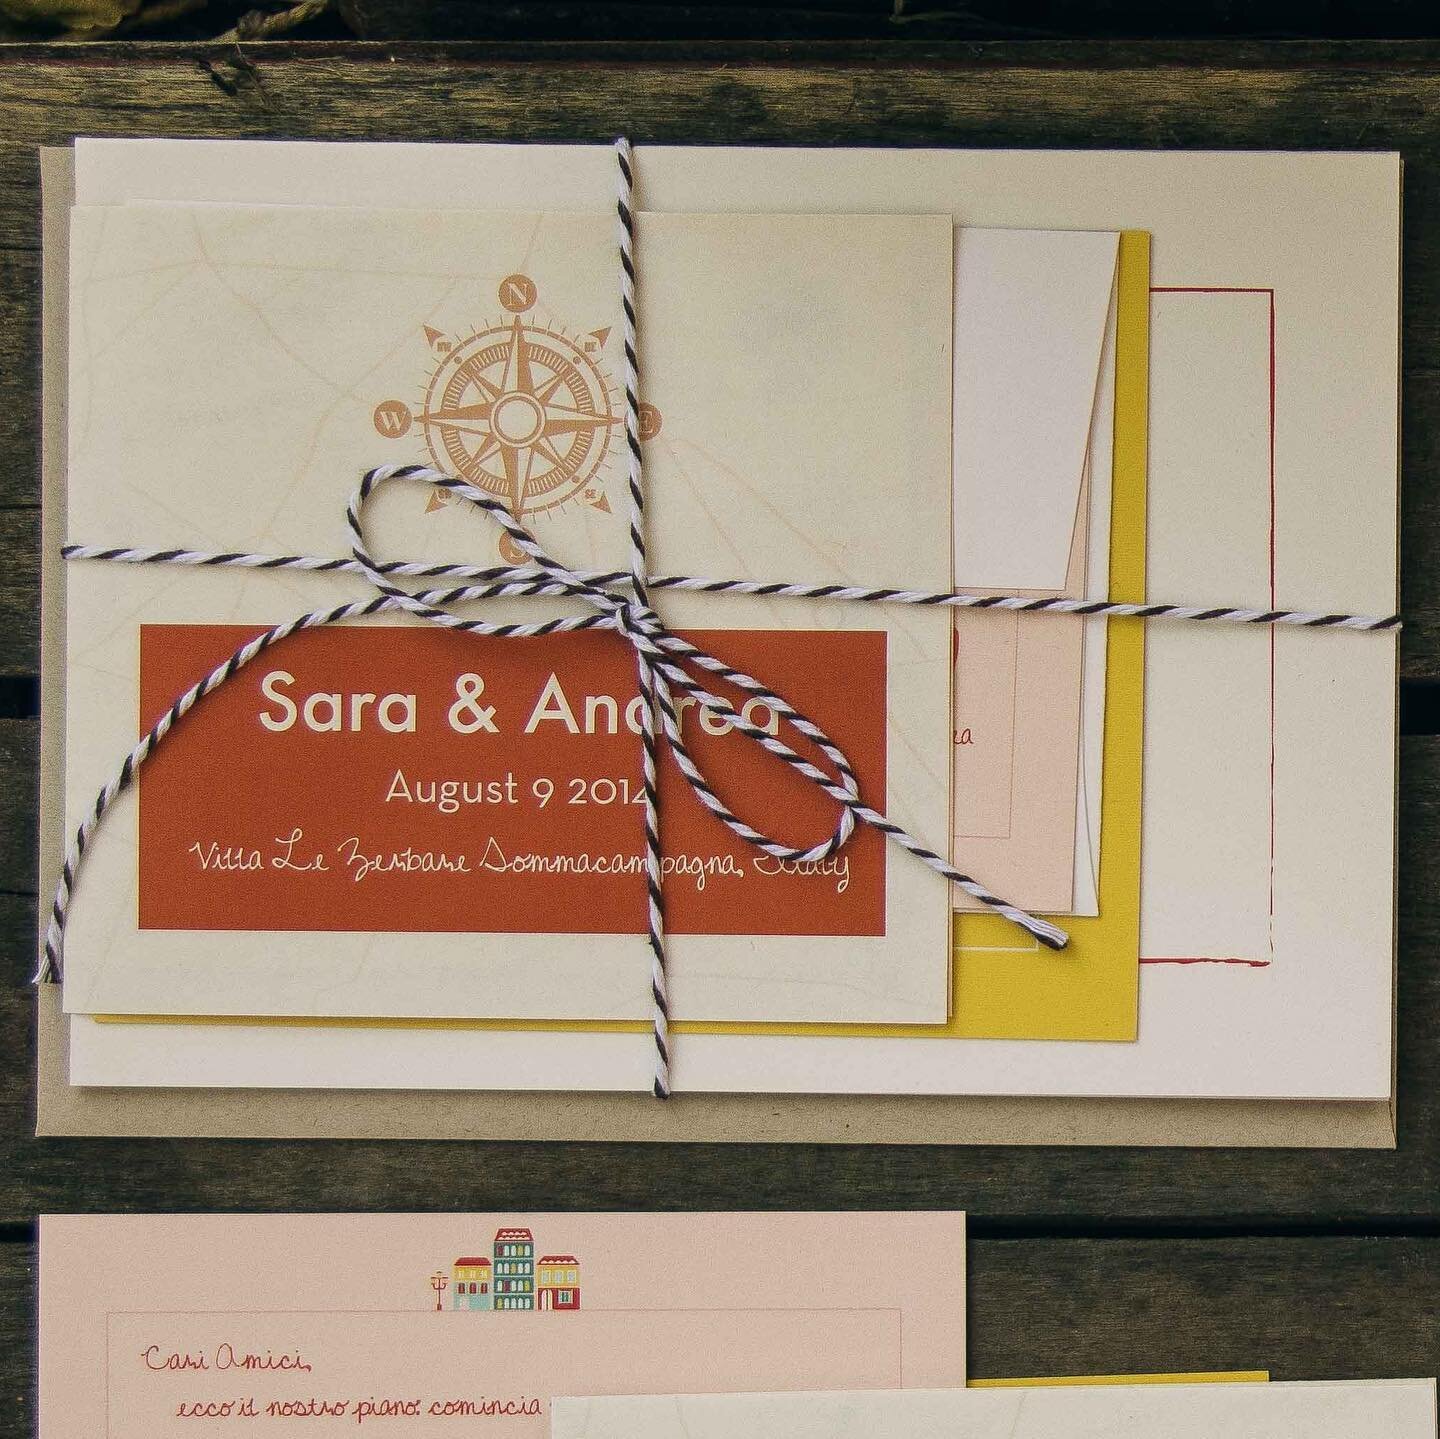 How you assemble your suite is a personal preference for many different reasons. You might want all the cards to be in front of the suite or all in the back to show off the invitation front. You do you, boo!

Throw back to that expansive Wes Anderson